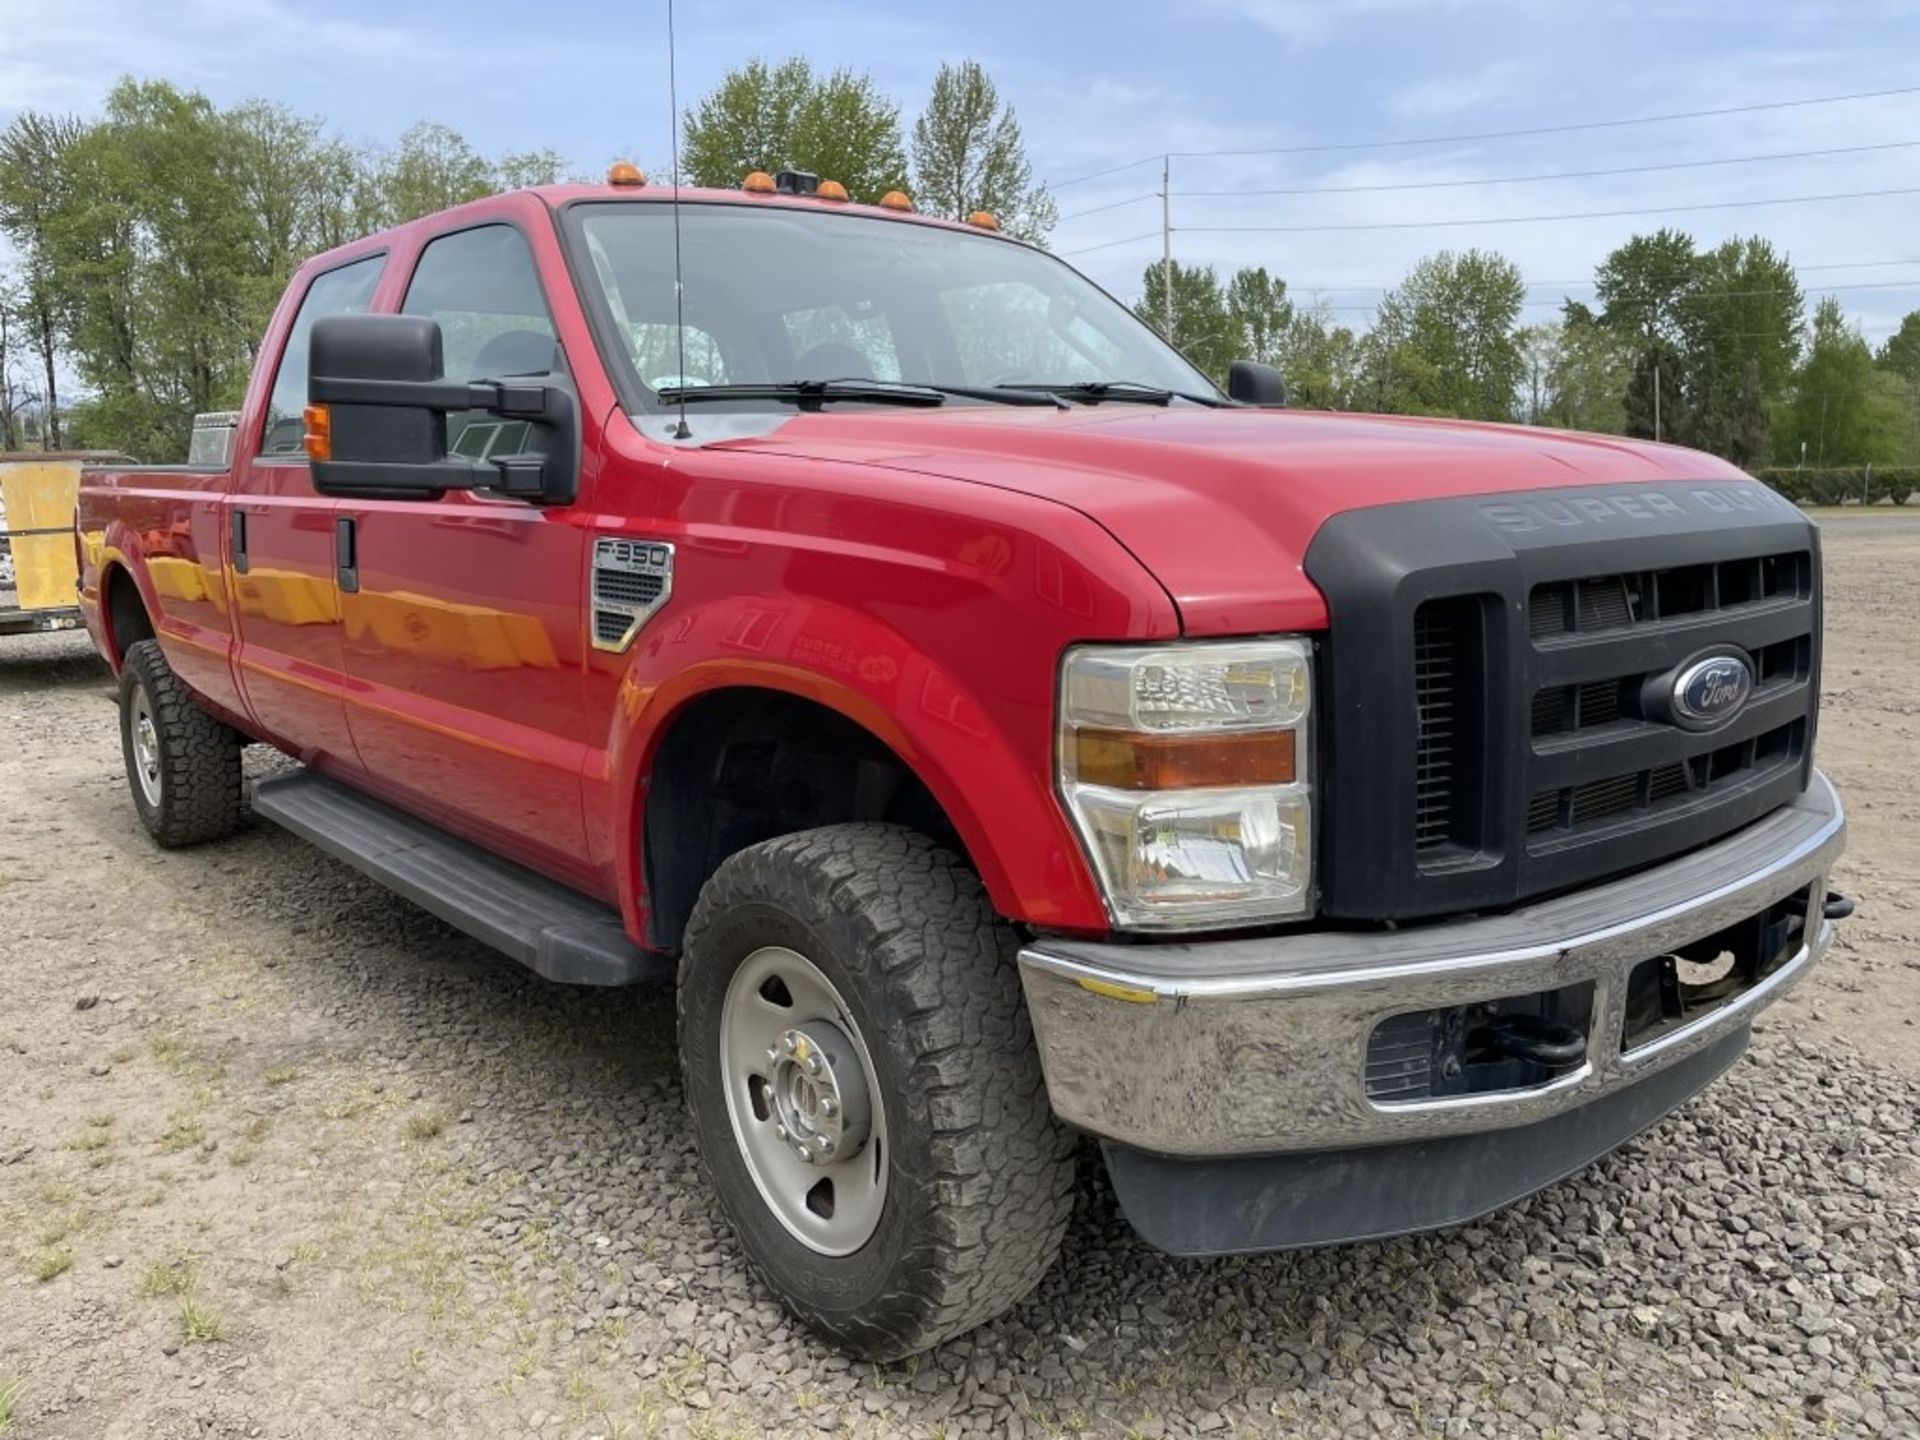 2009 Ford F350 XL SD 4x4 Crew Cab Pickup - Image 2 of 16